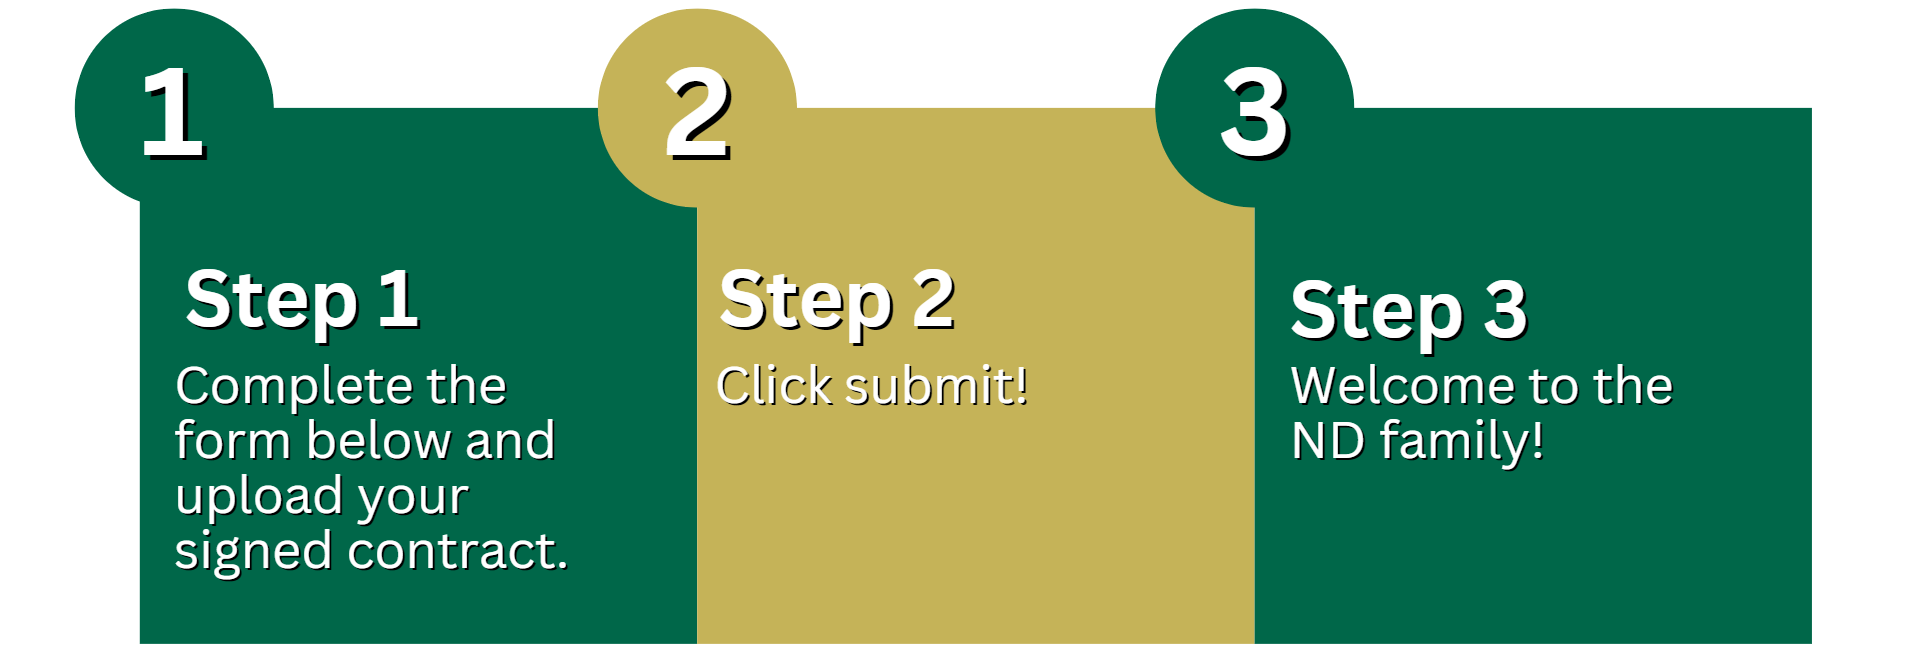 3 steps to register graphic